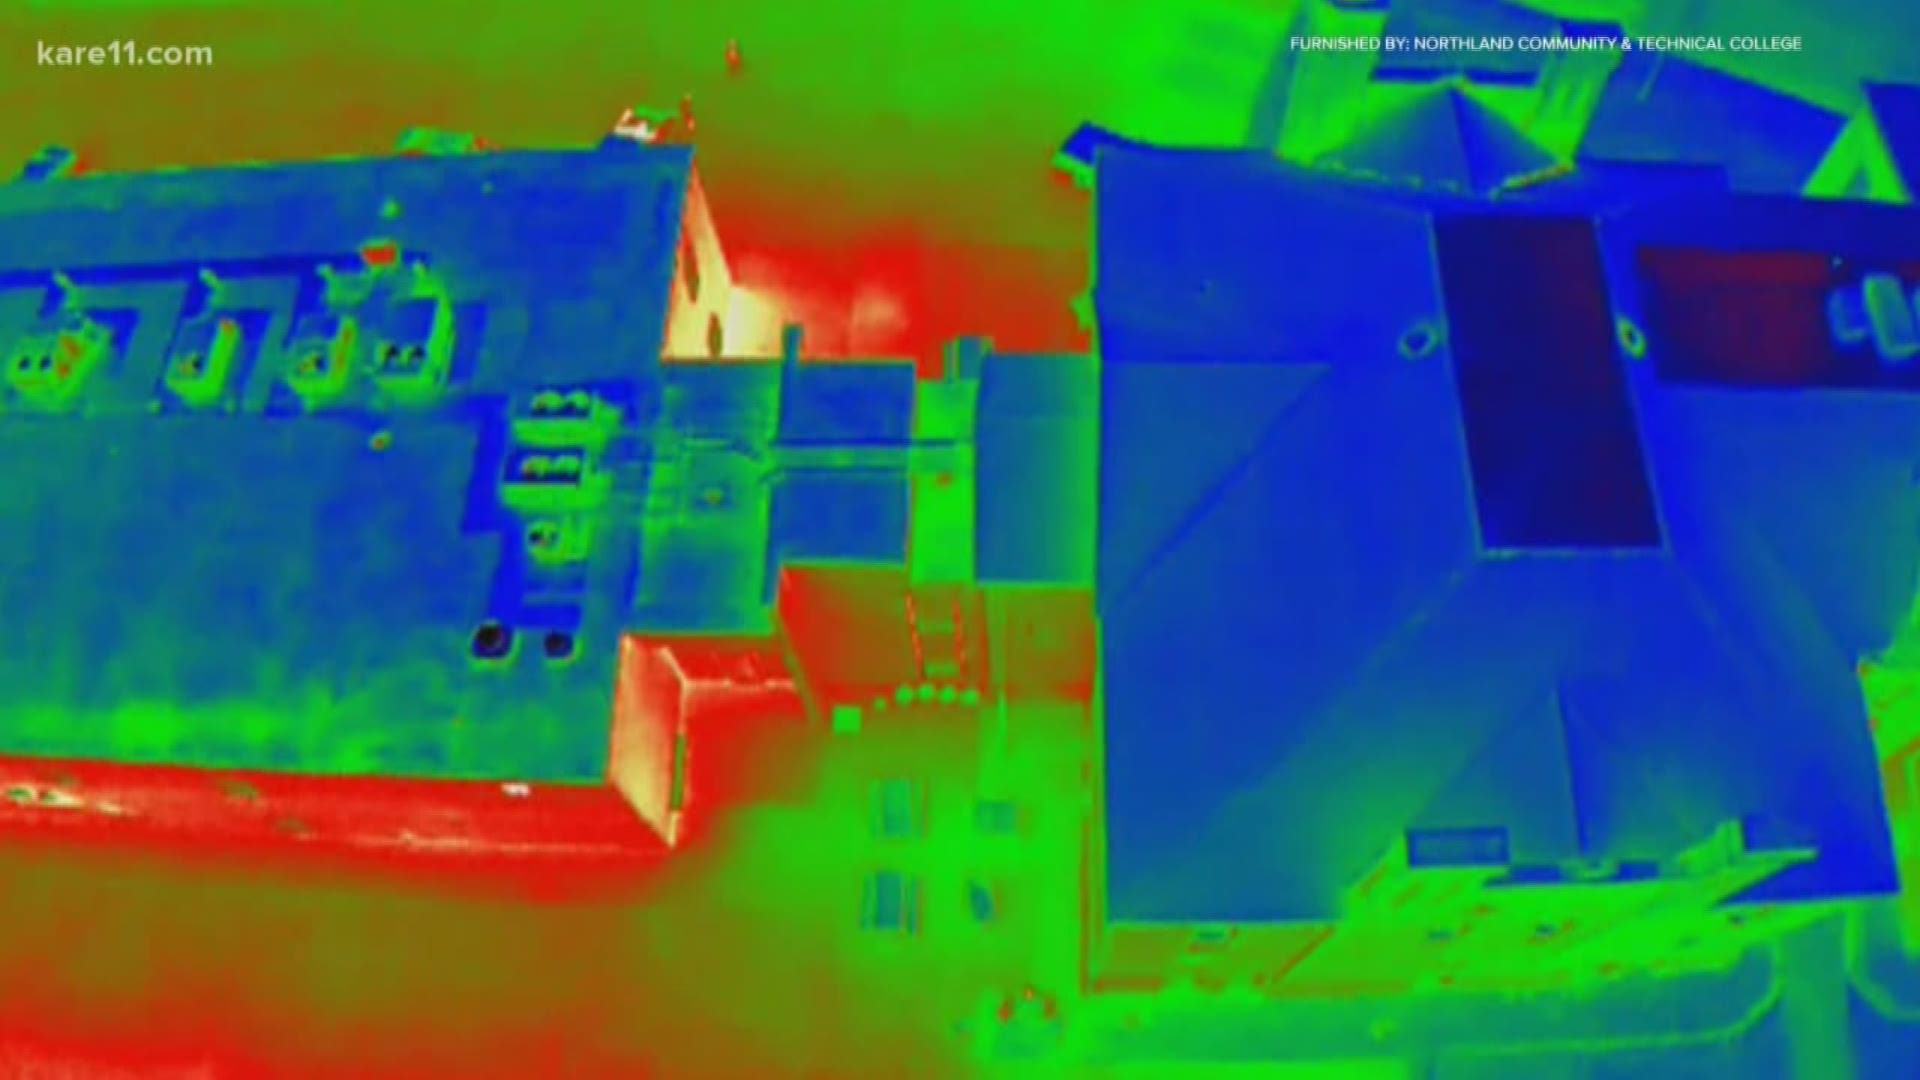 The city of Warren launched a thermal imaging project a few years ago, using drones to detect heat loss in every single building in town.